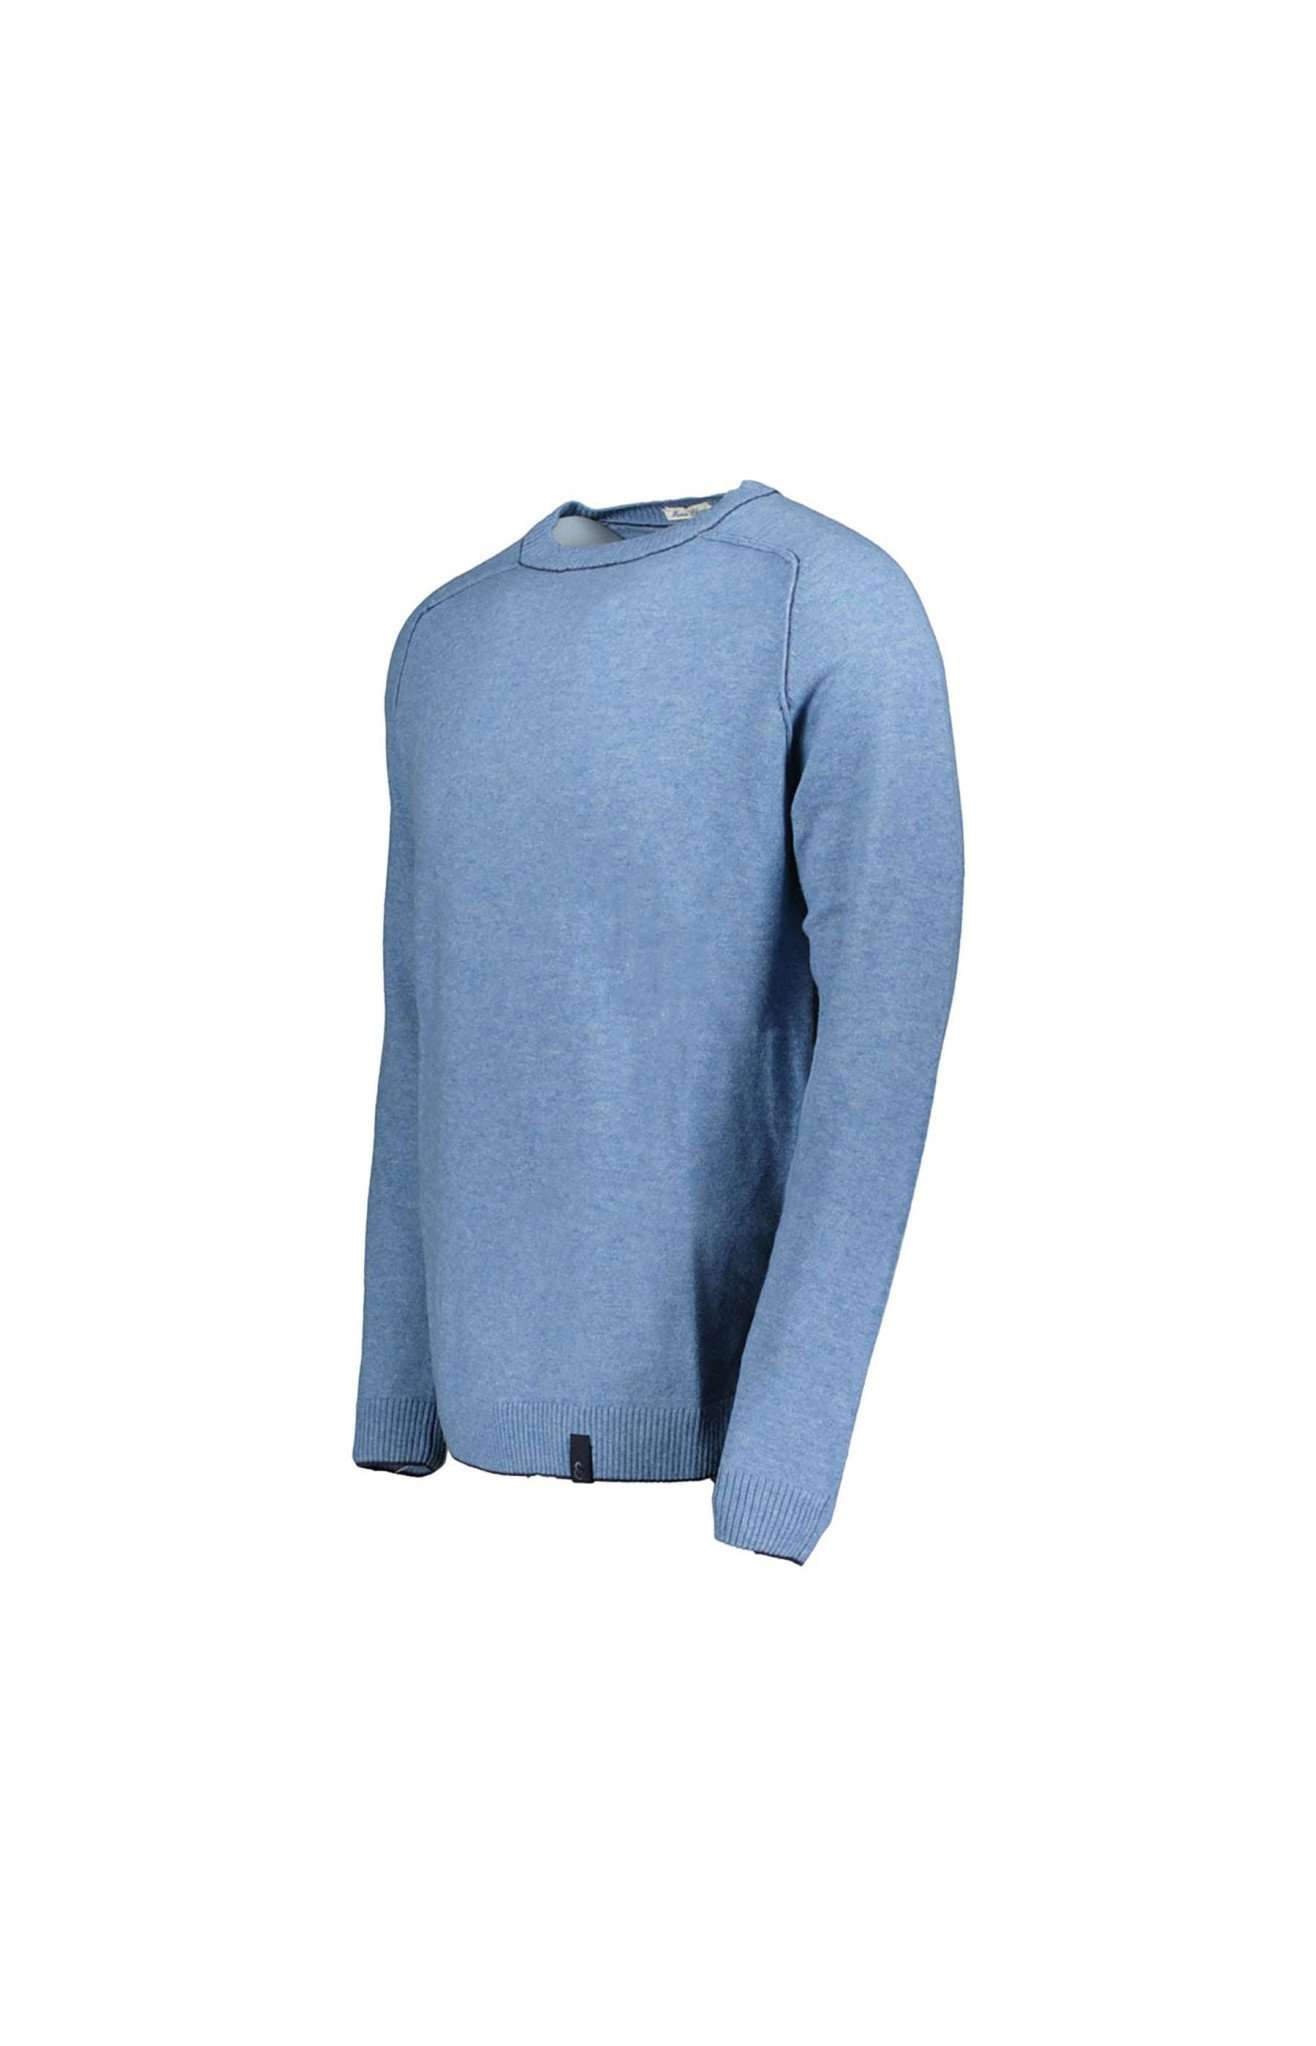 Roundneck-Merino Blend in Denim Pullover Colours and Sons   